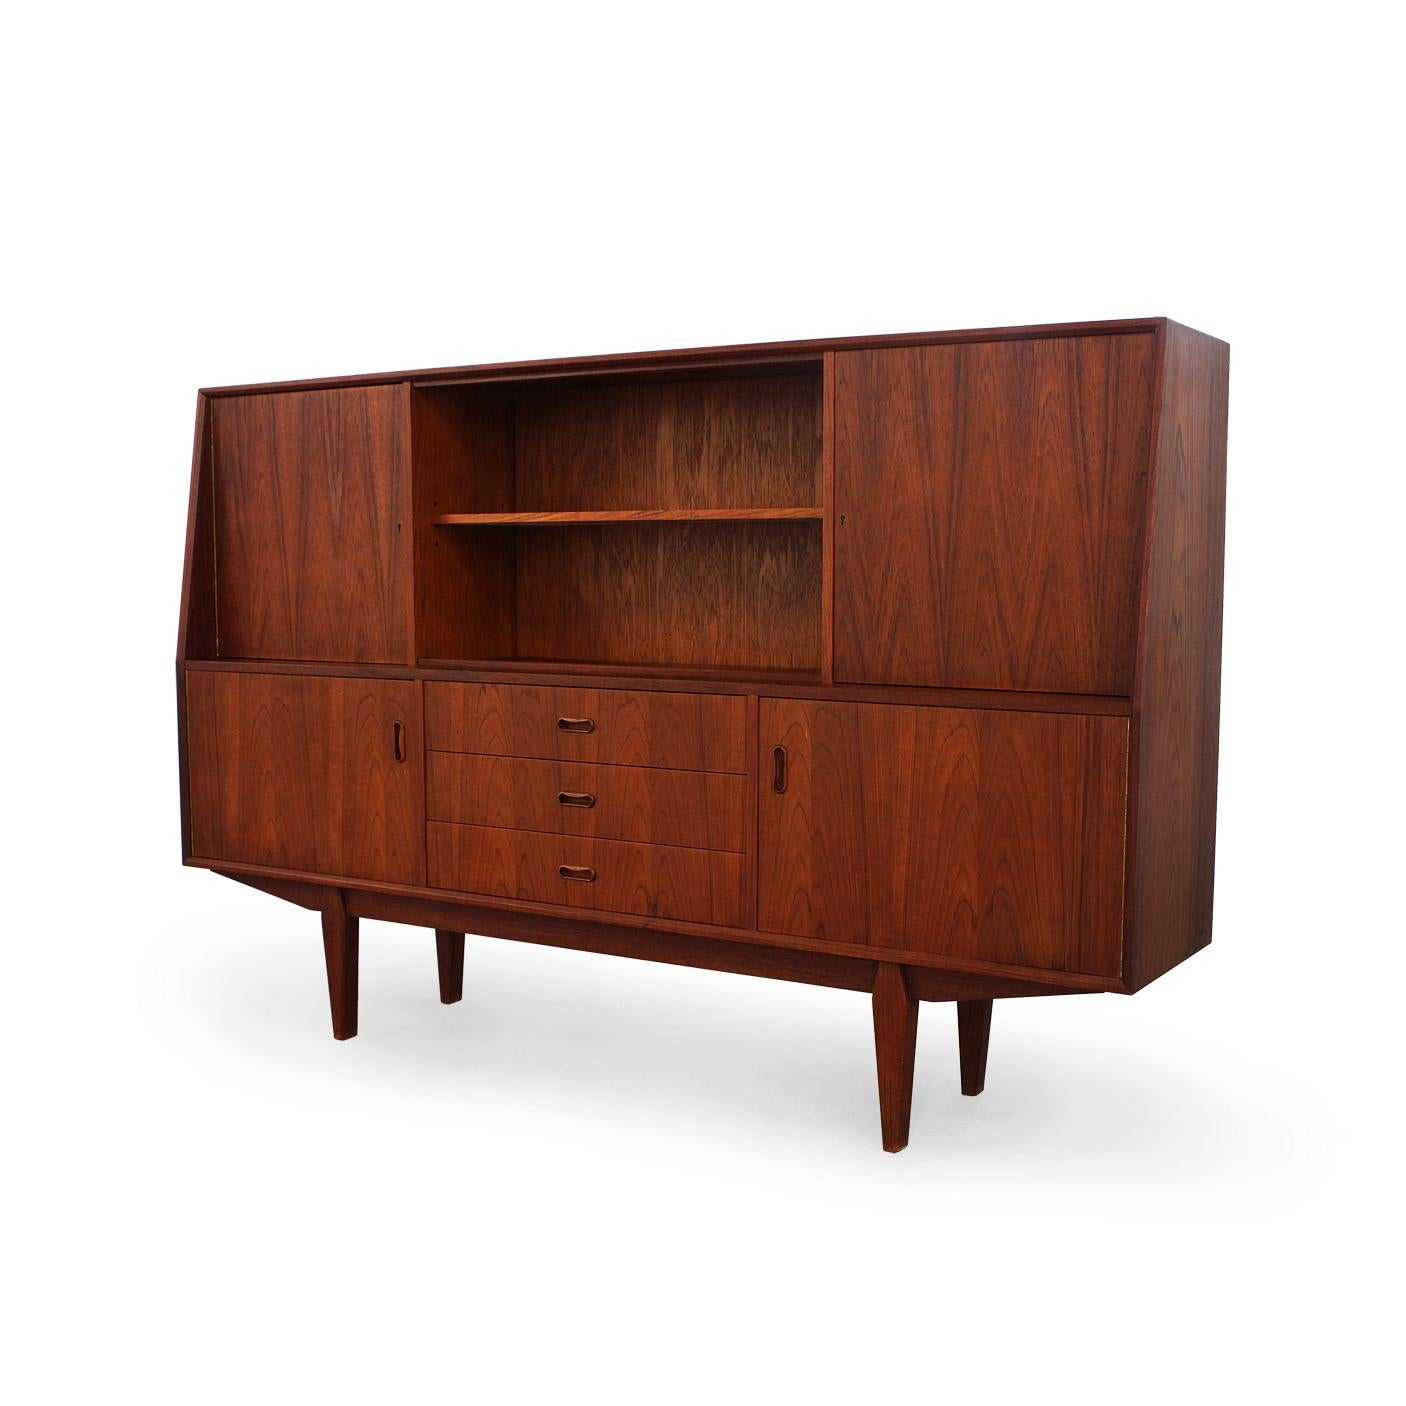 Danish Vintage Teak Credenza with Locking Cabinets and Bar Section